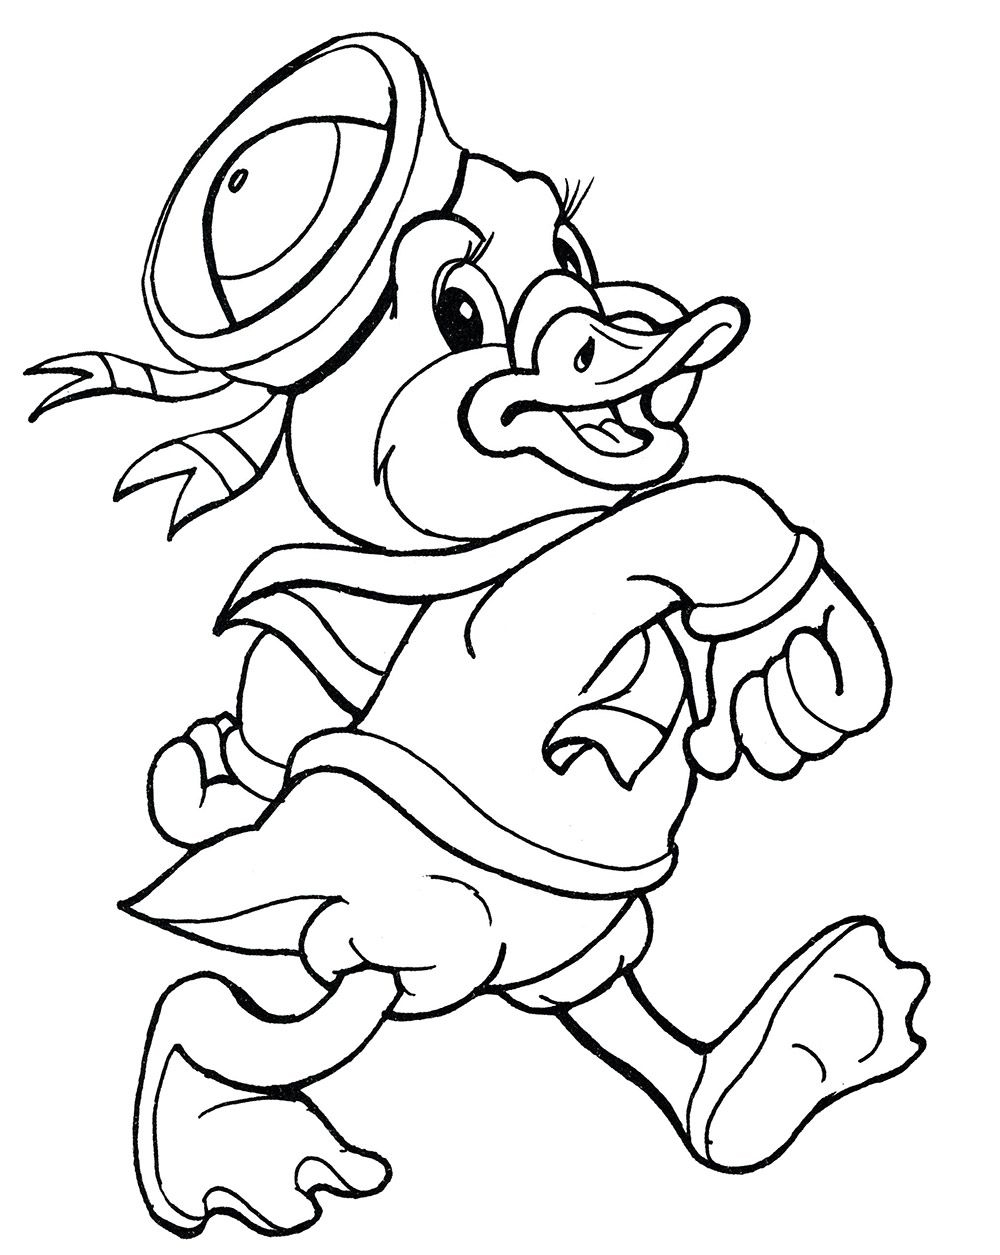 Download Goose coloring pages to download and print for free